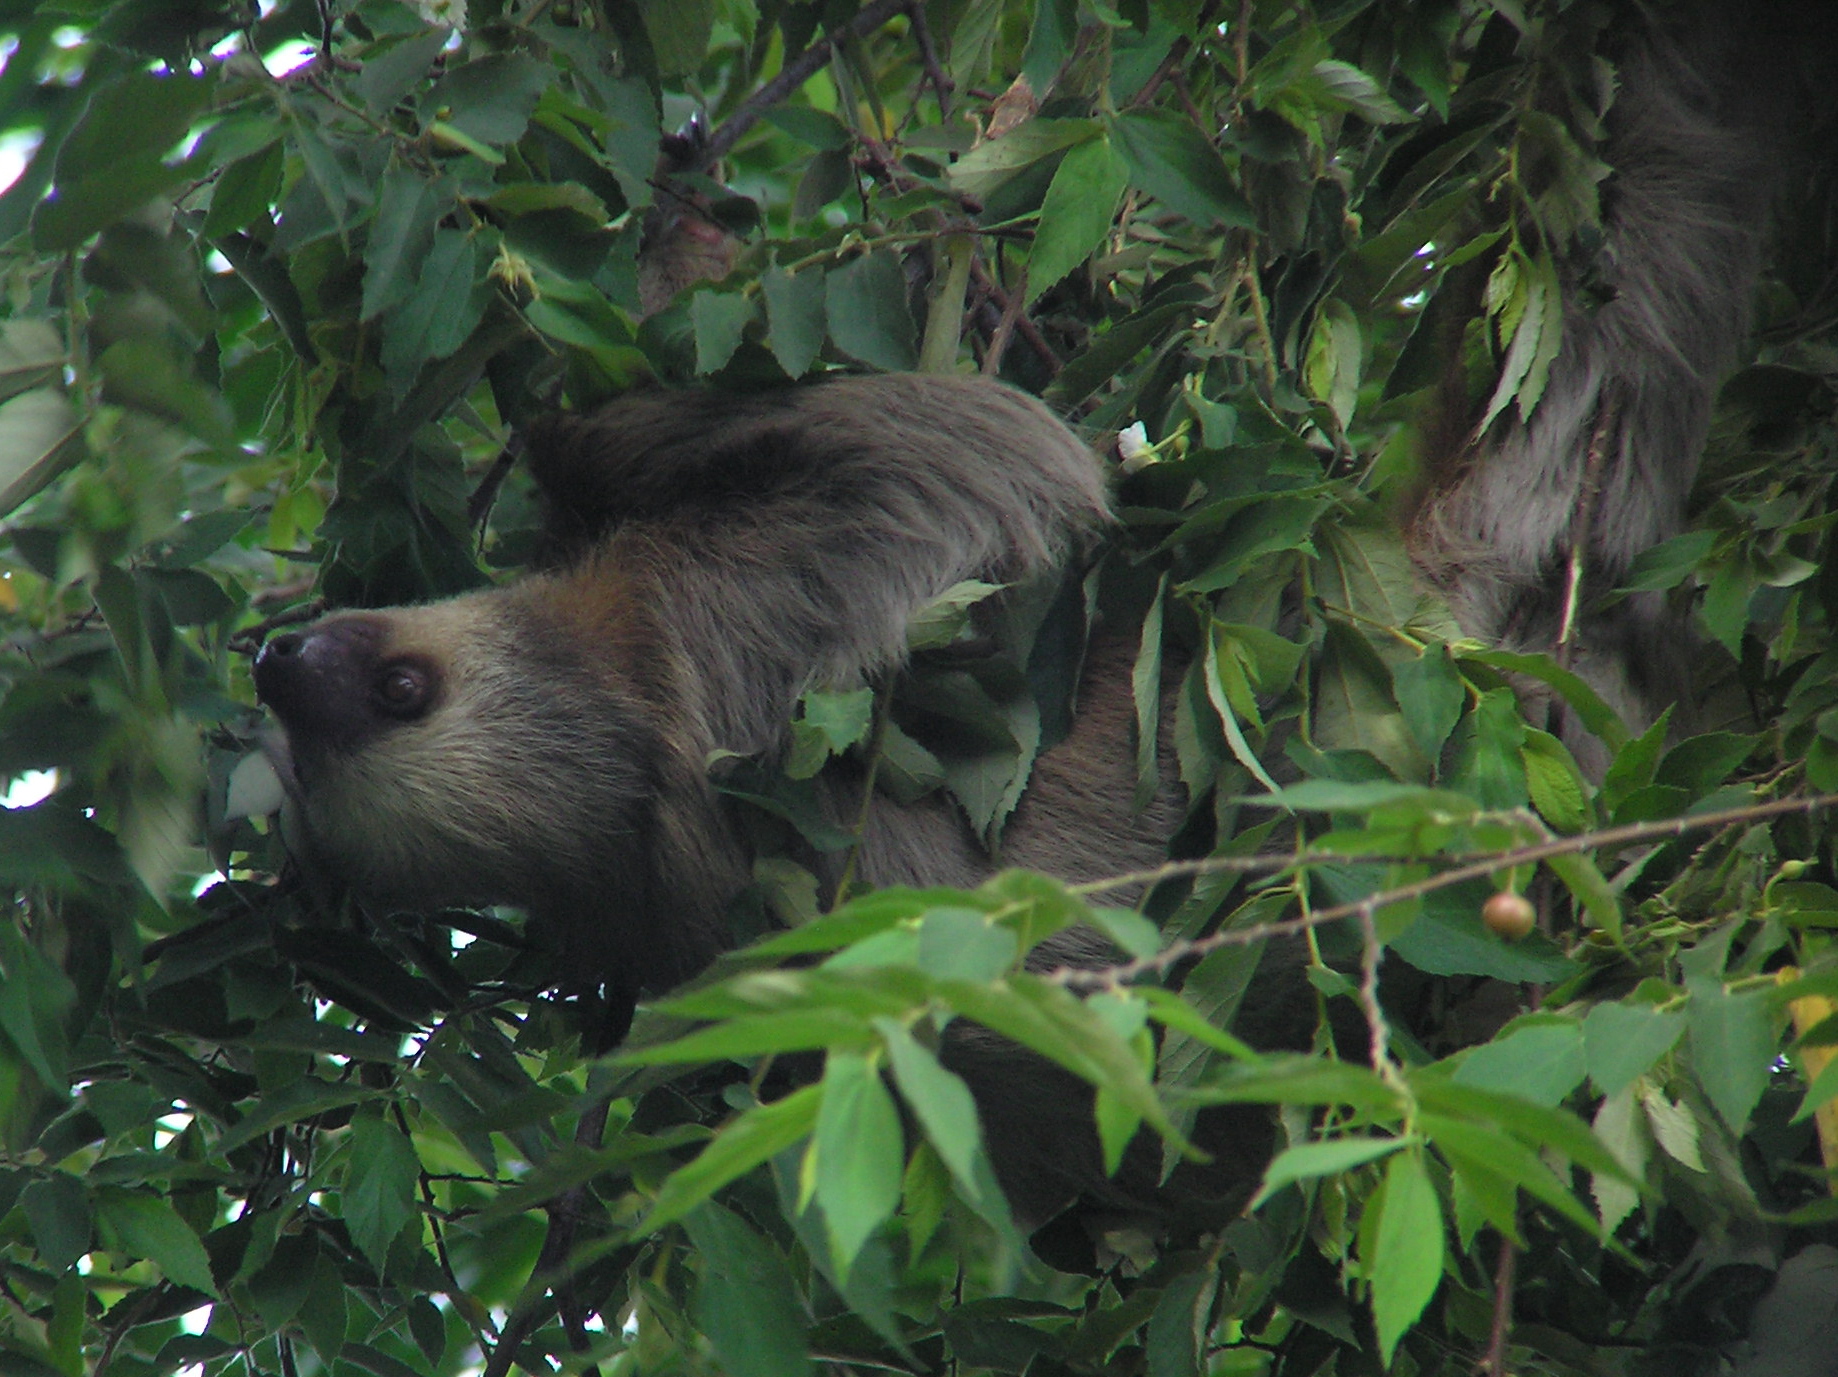 Click picture to see more Hoffman's Two-toed Sloth photos.